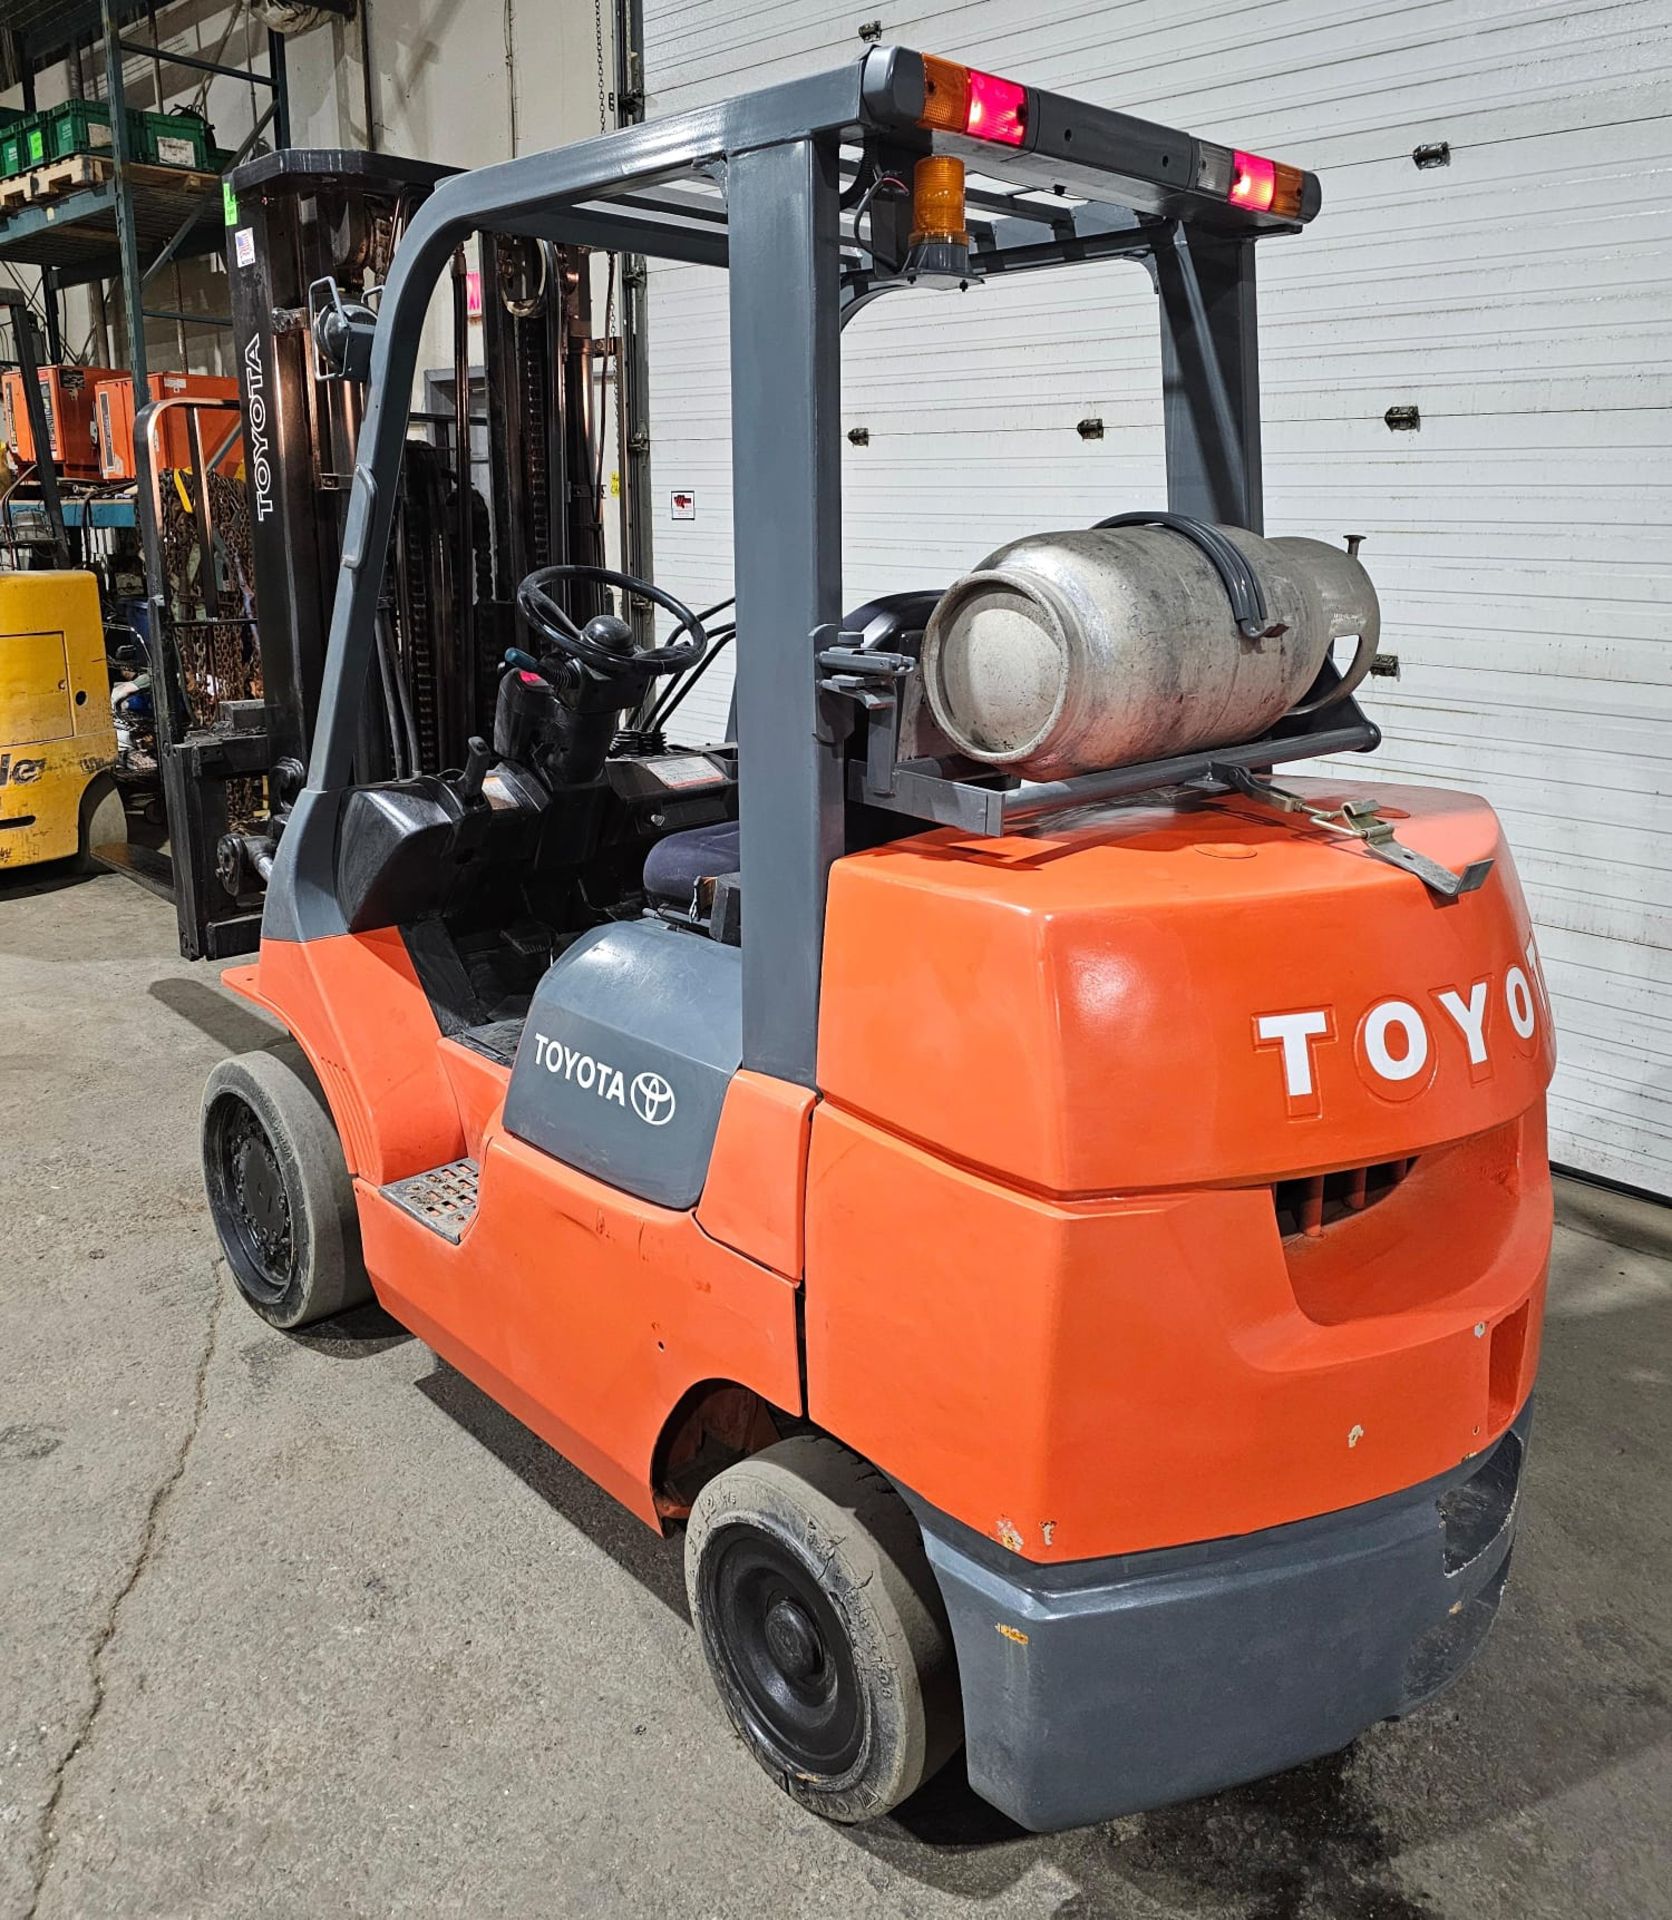 Toyota 7,000lbs Capacity LPG (Propane) Forklift with sideshift 60" Forks & 3-STAGE MAST 187" - Image 2 of 5